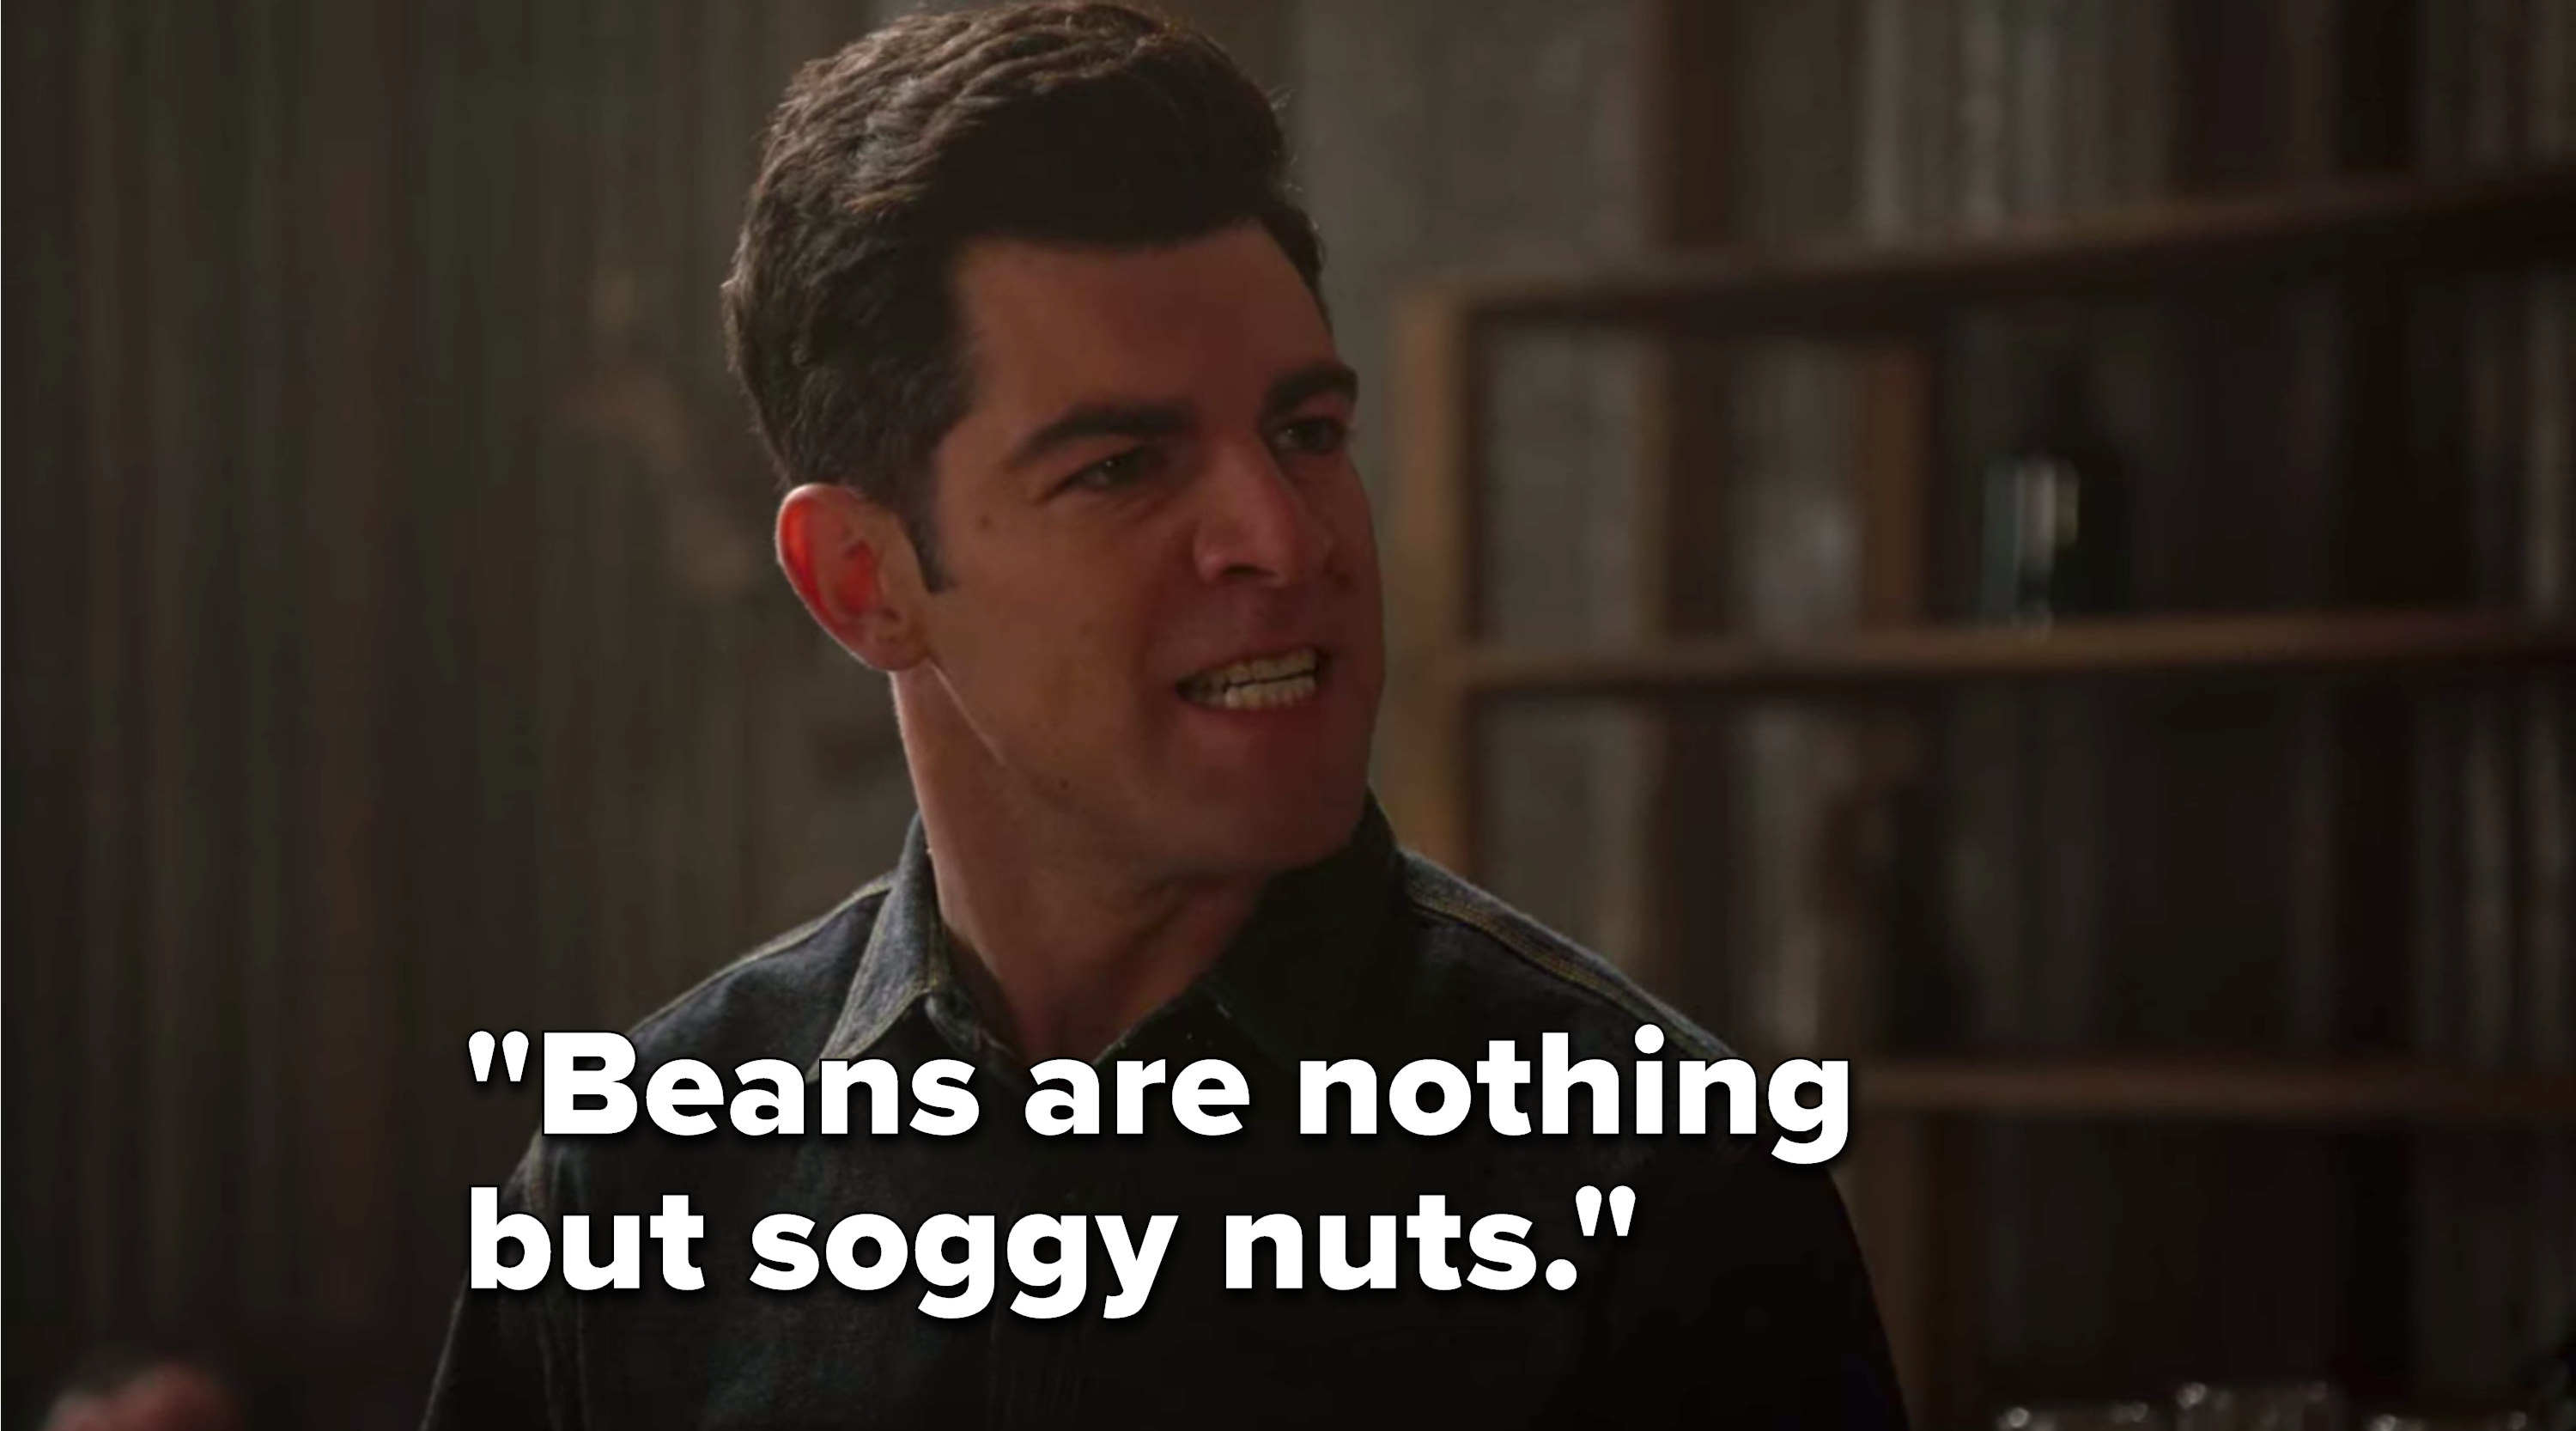 Schmidt says, Beans are nothing but soggy nuts